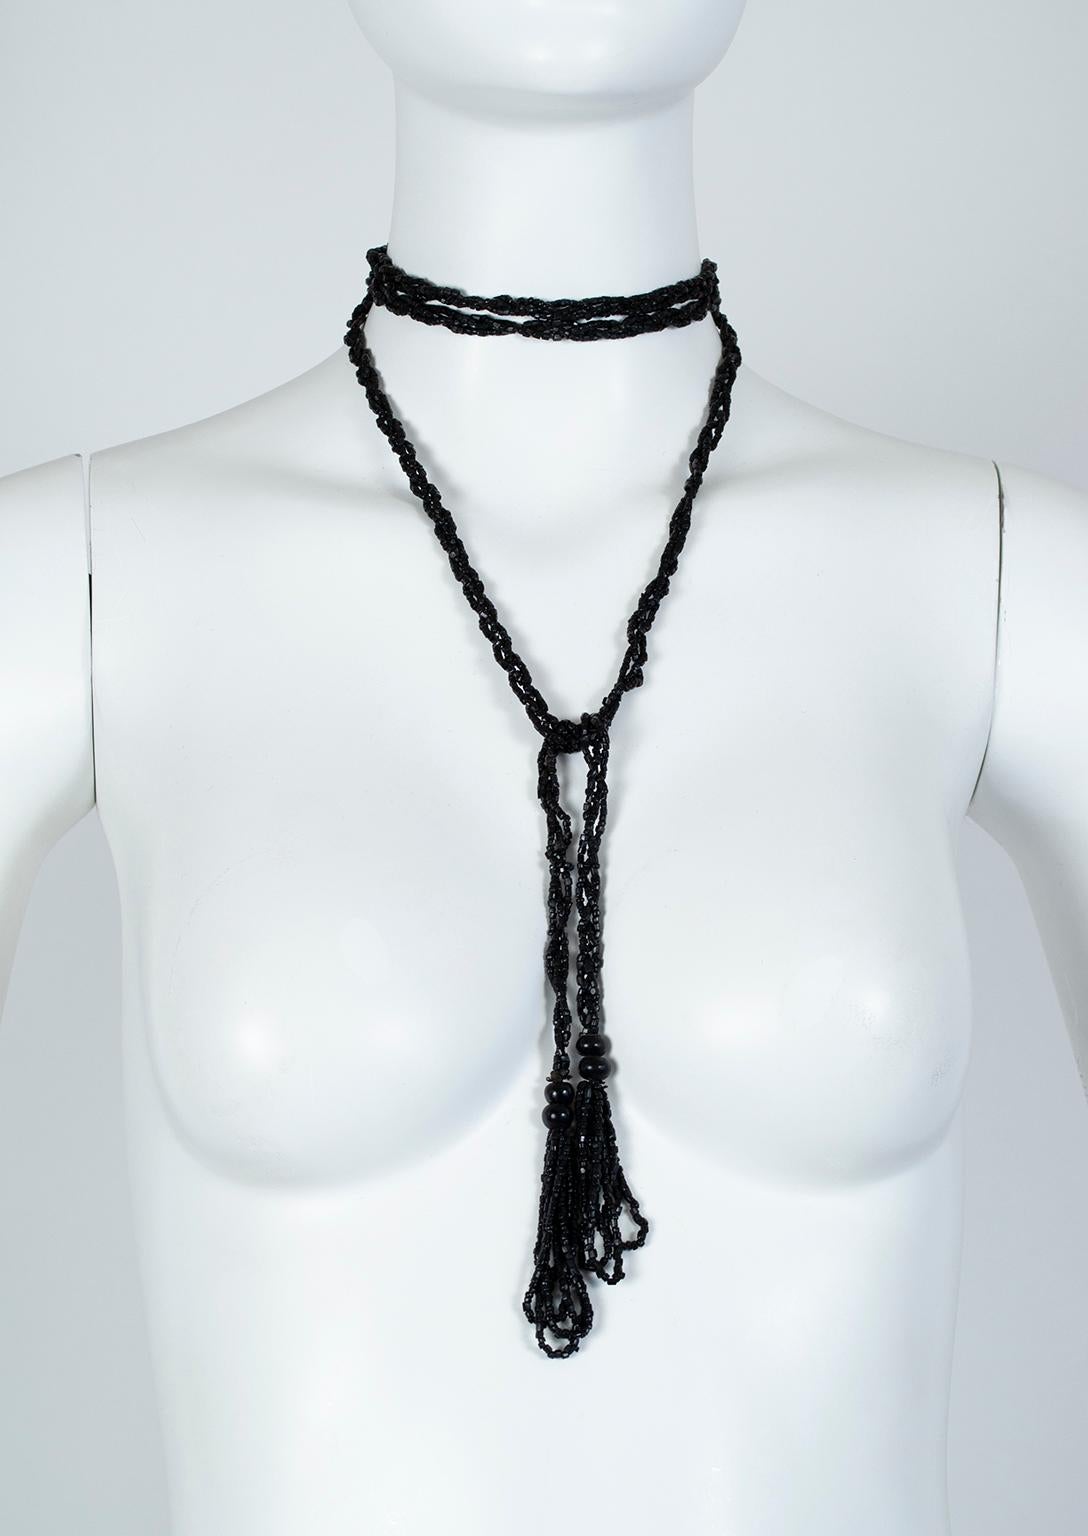 The ultimate multi-tasker, this five foot braided length of jet beads can be worn around the neck, wrist, waist or head and looks like a completely different piece of jewelry each time. Loop it as a lariat, hang it with loose ends like a scarf, wind